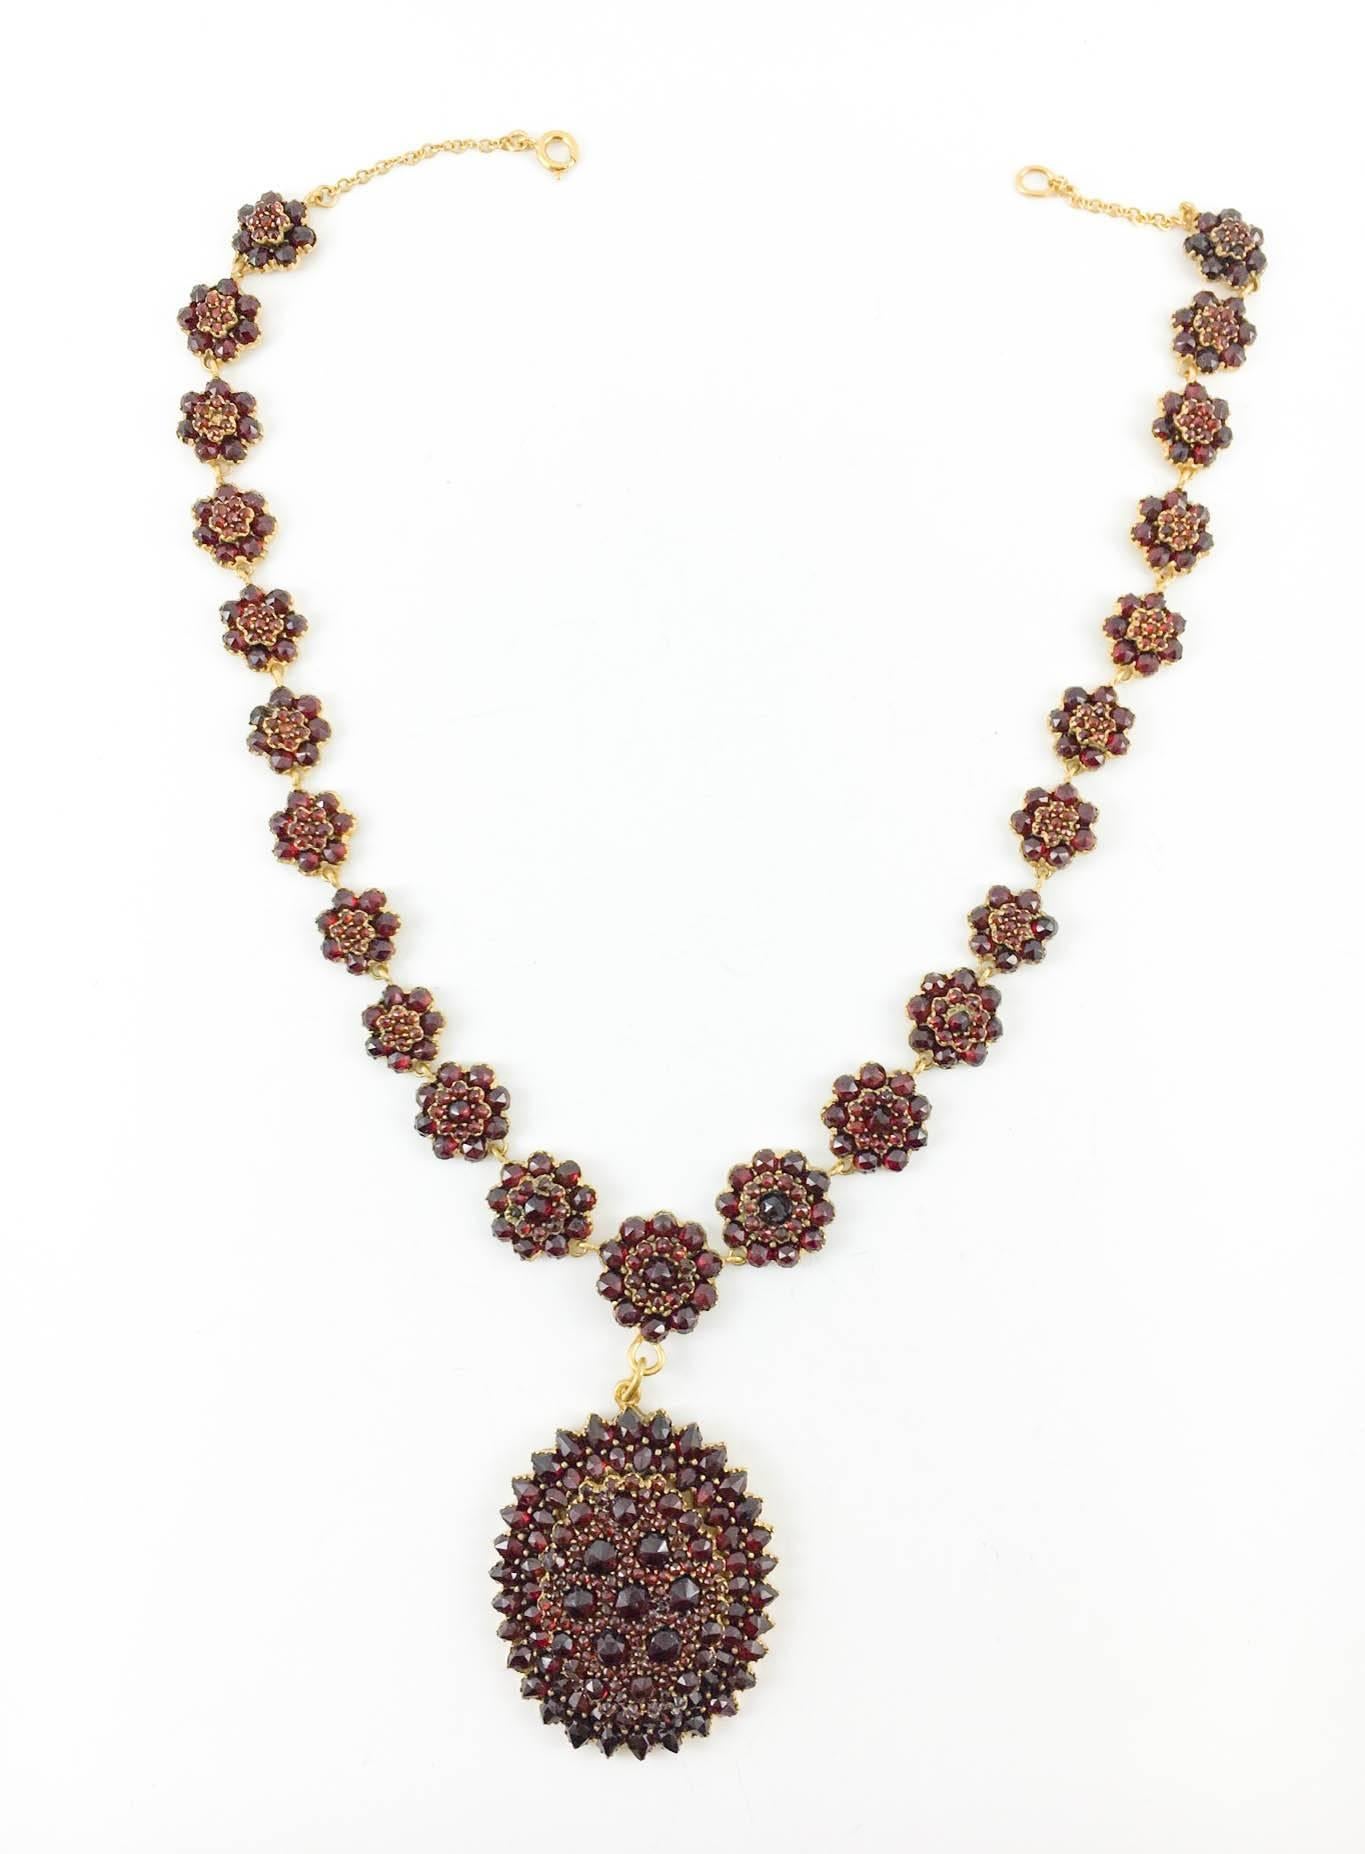 Antique Hungarian Garnet Necklace - 1900s In Excellent Condition In London, Chelsea